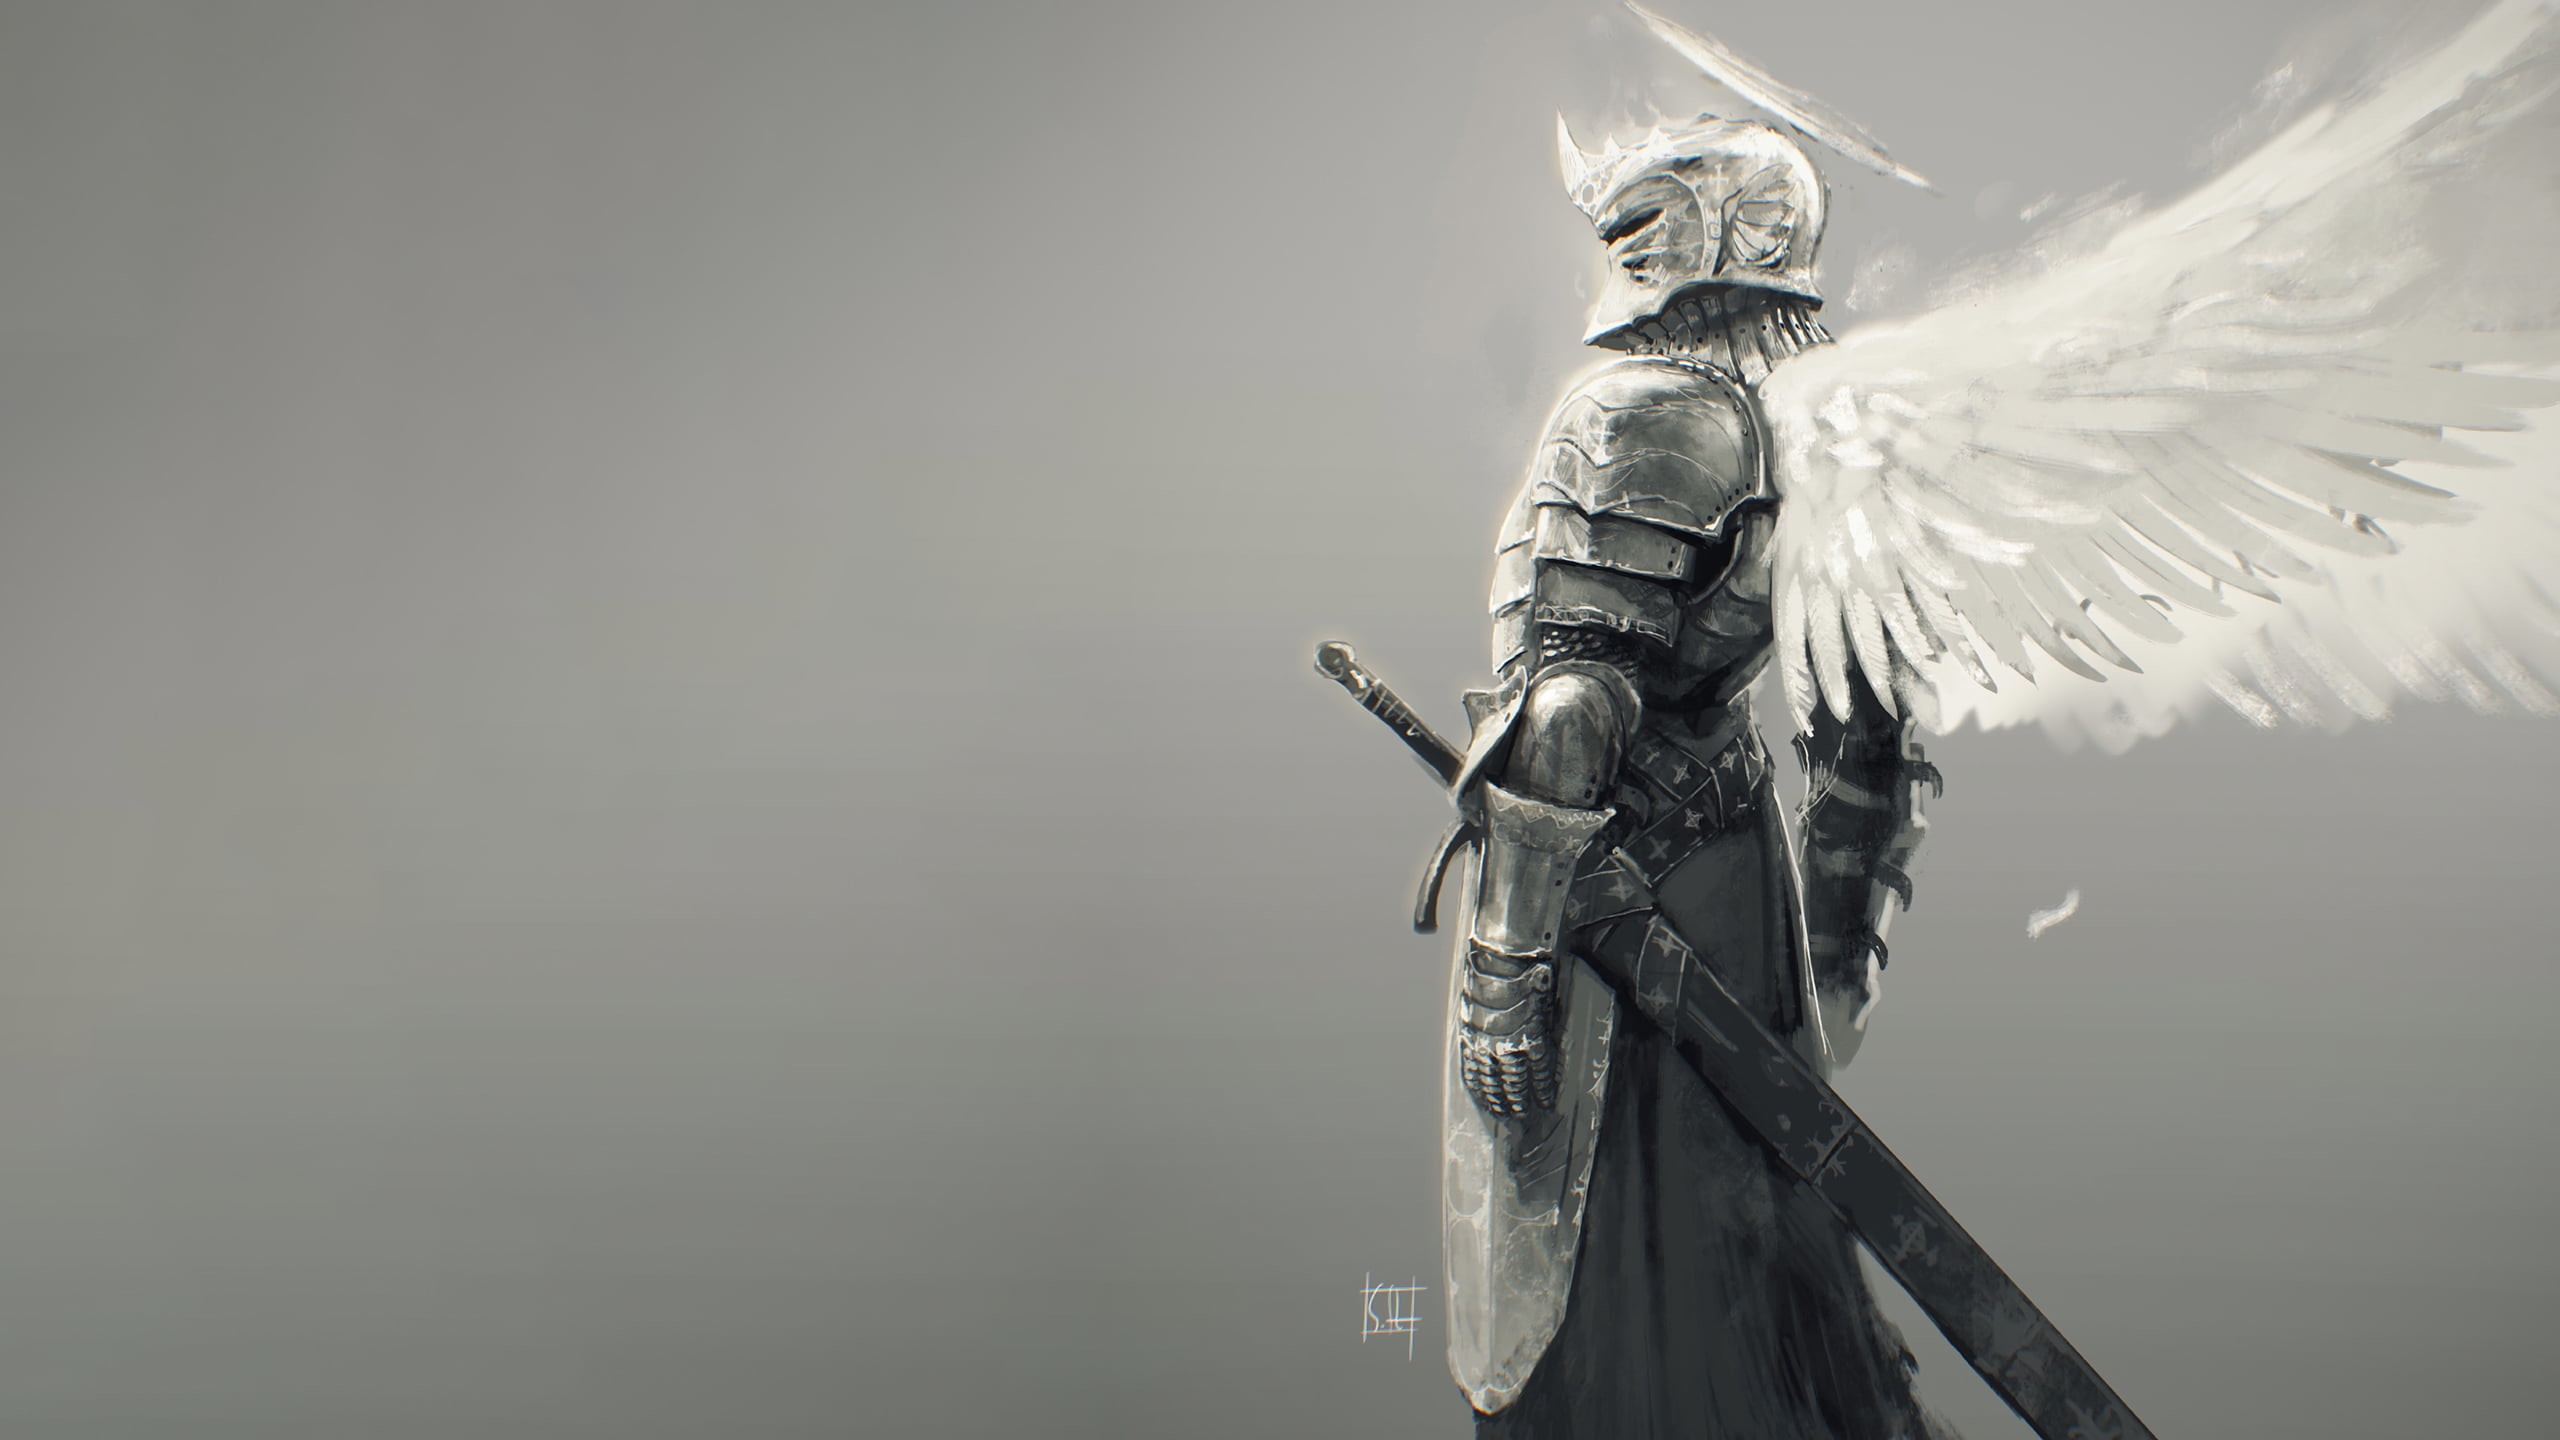 2560x1440, Medieval Knight With Wings And Halo Illustration - Angel Knight - HD Wallpaper 